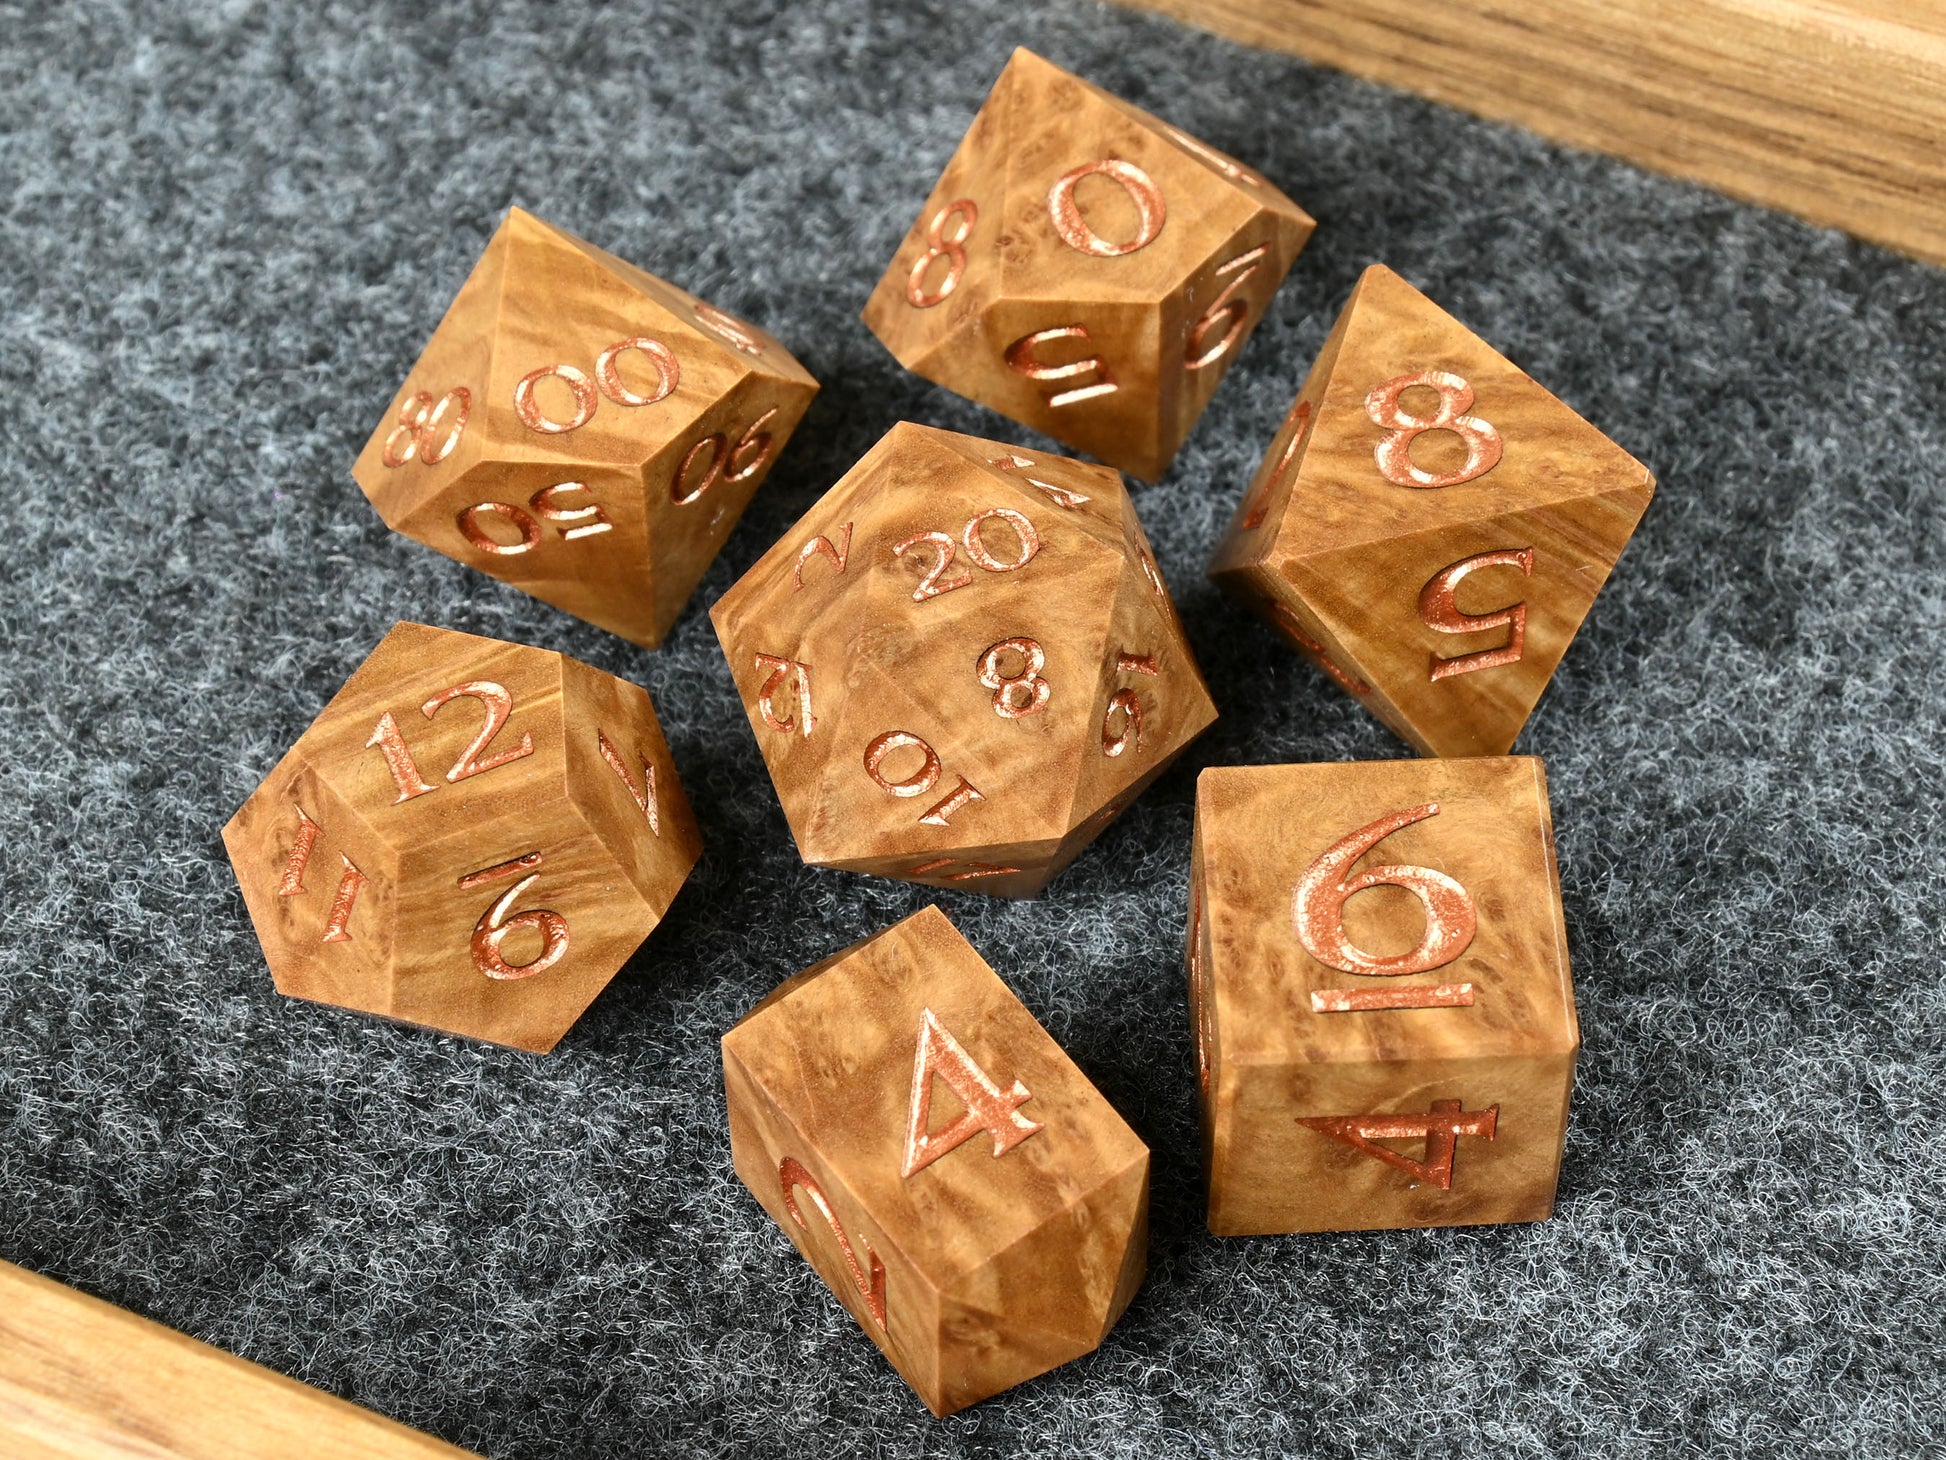 Brown Mallee burl wood dice set with bright bronze numbers for dnd rpg